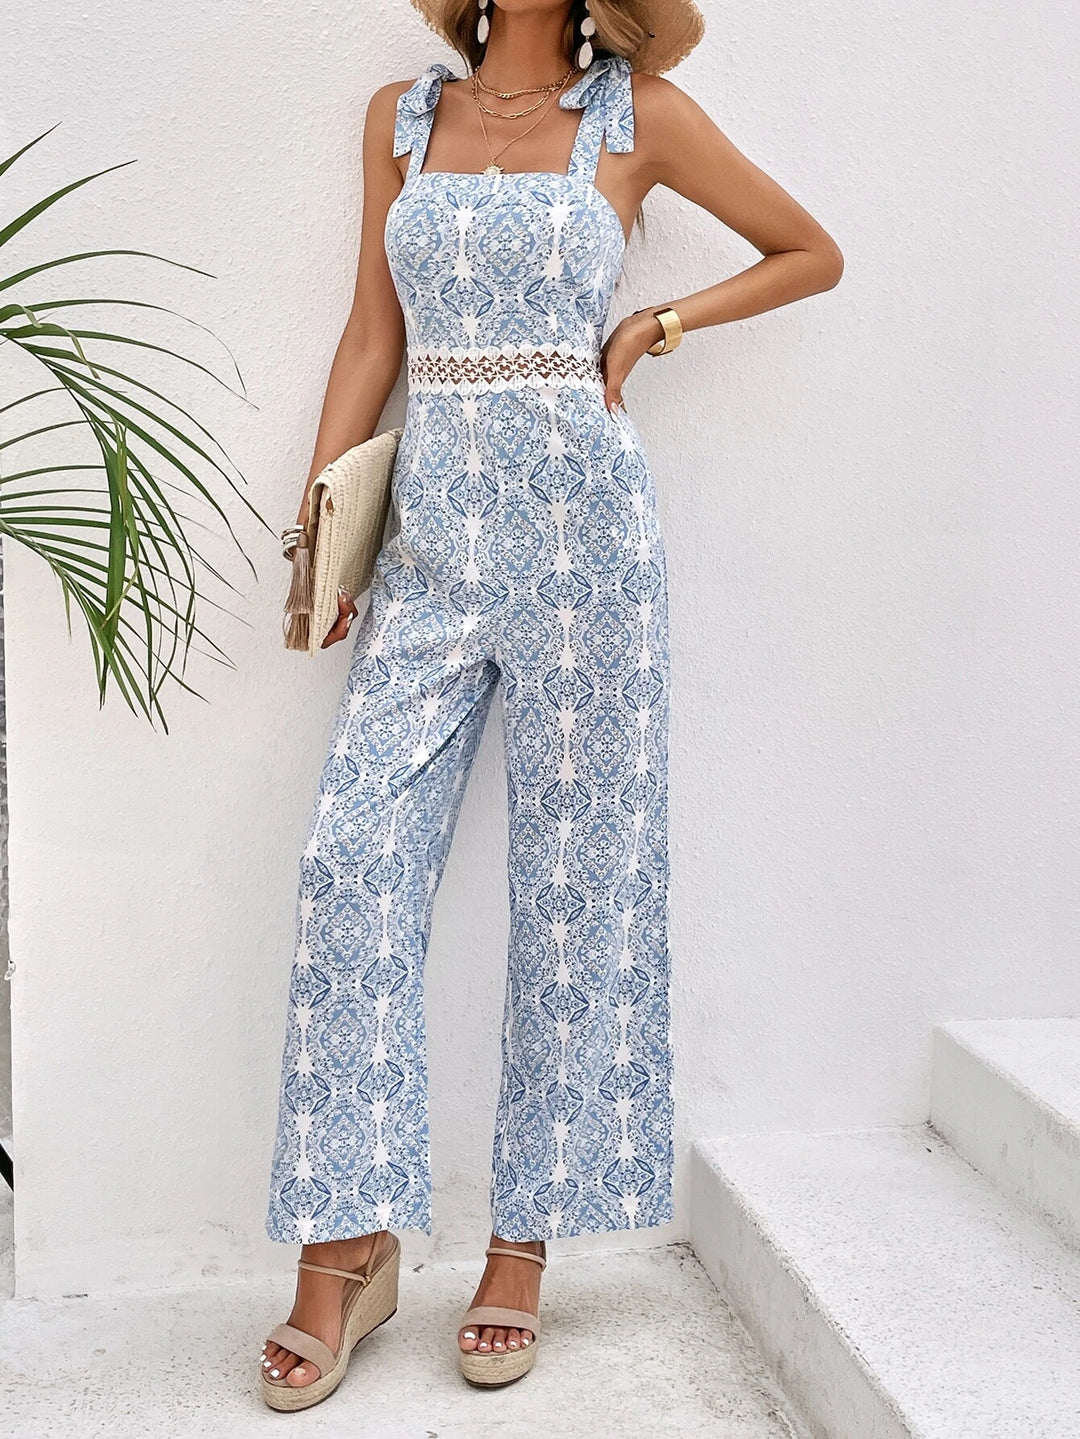 All Over Print Sleeveless Cami Jumpsuit